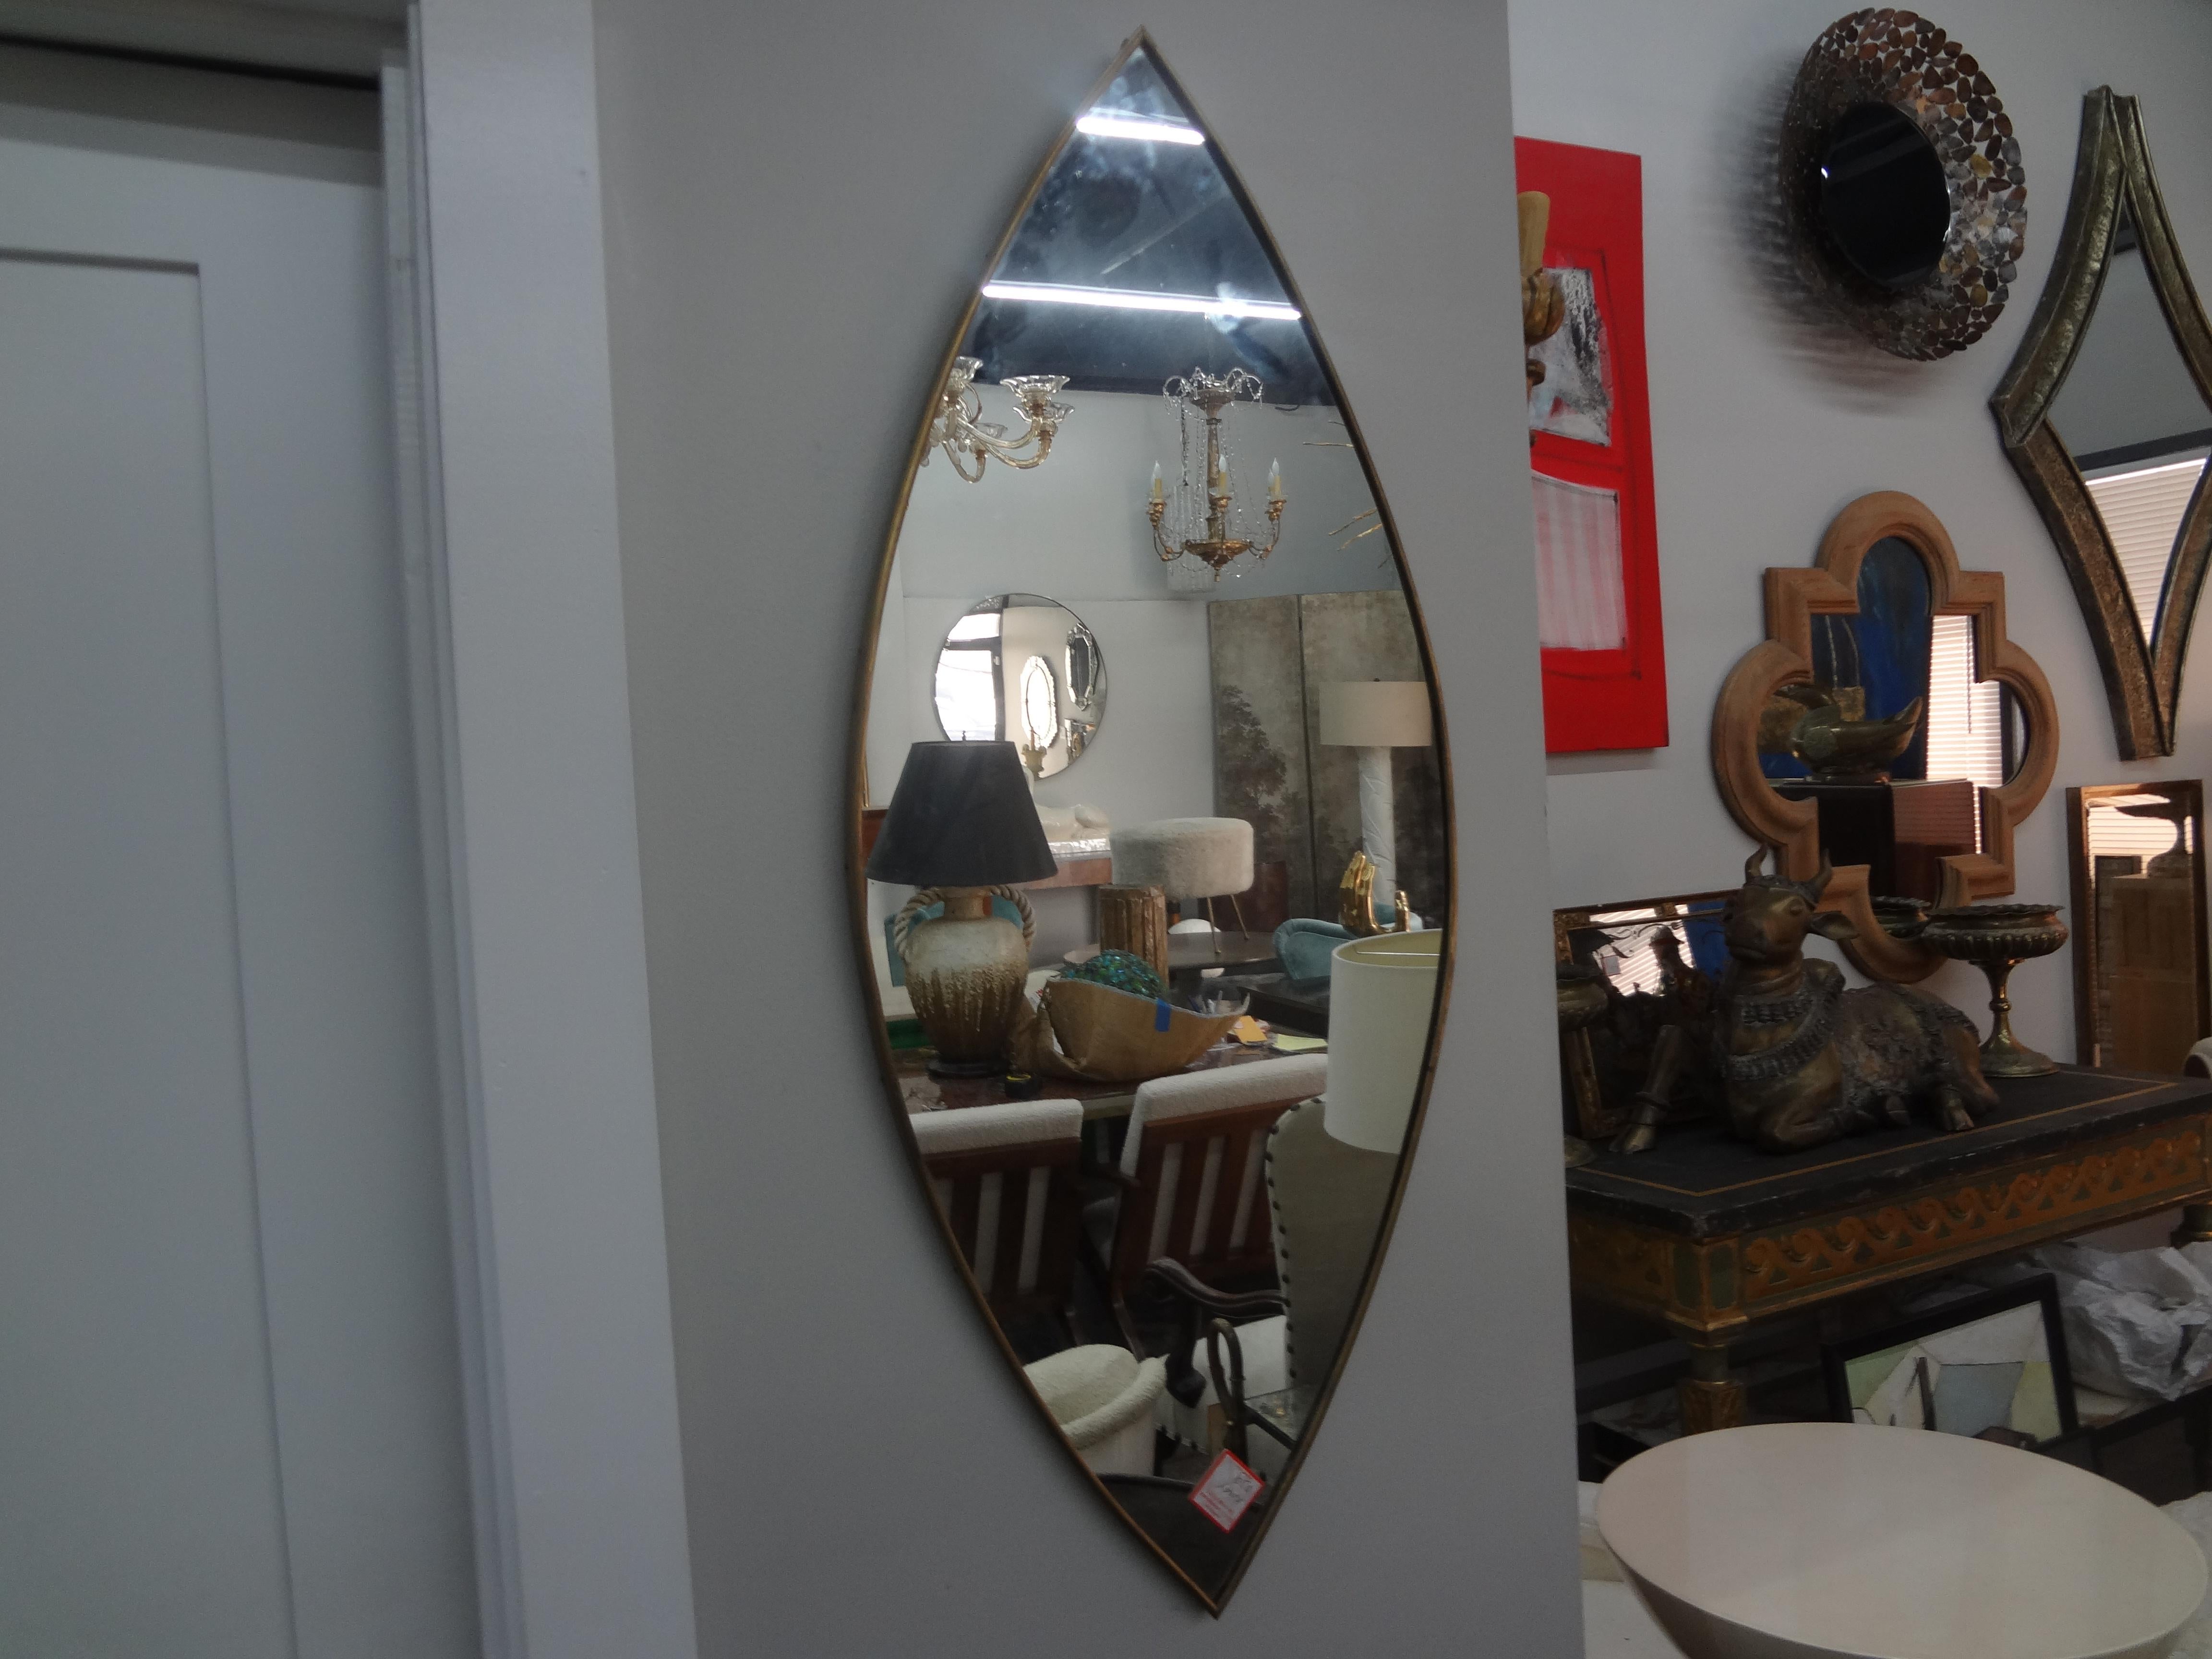 Italian Modern Gio Ponti Inspired Brass Mirror.
Our stunning shapely Italian brass mirror would be perfect in a powder room or dressing room.
Lovely!